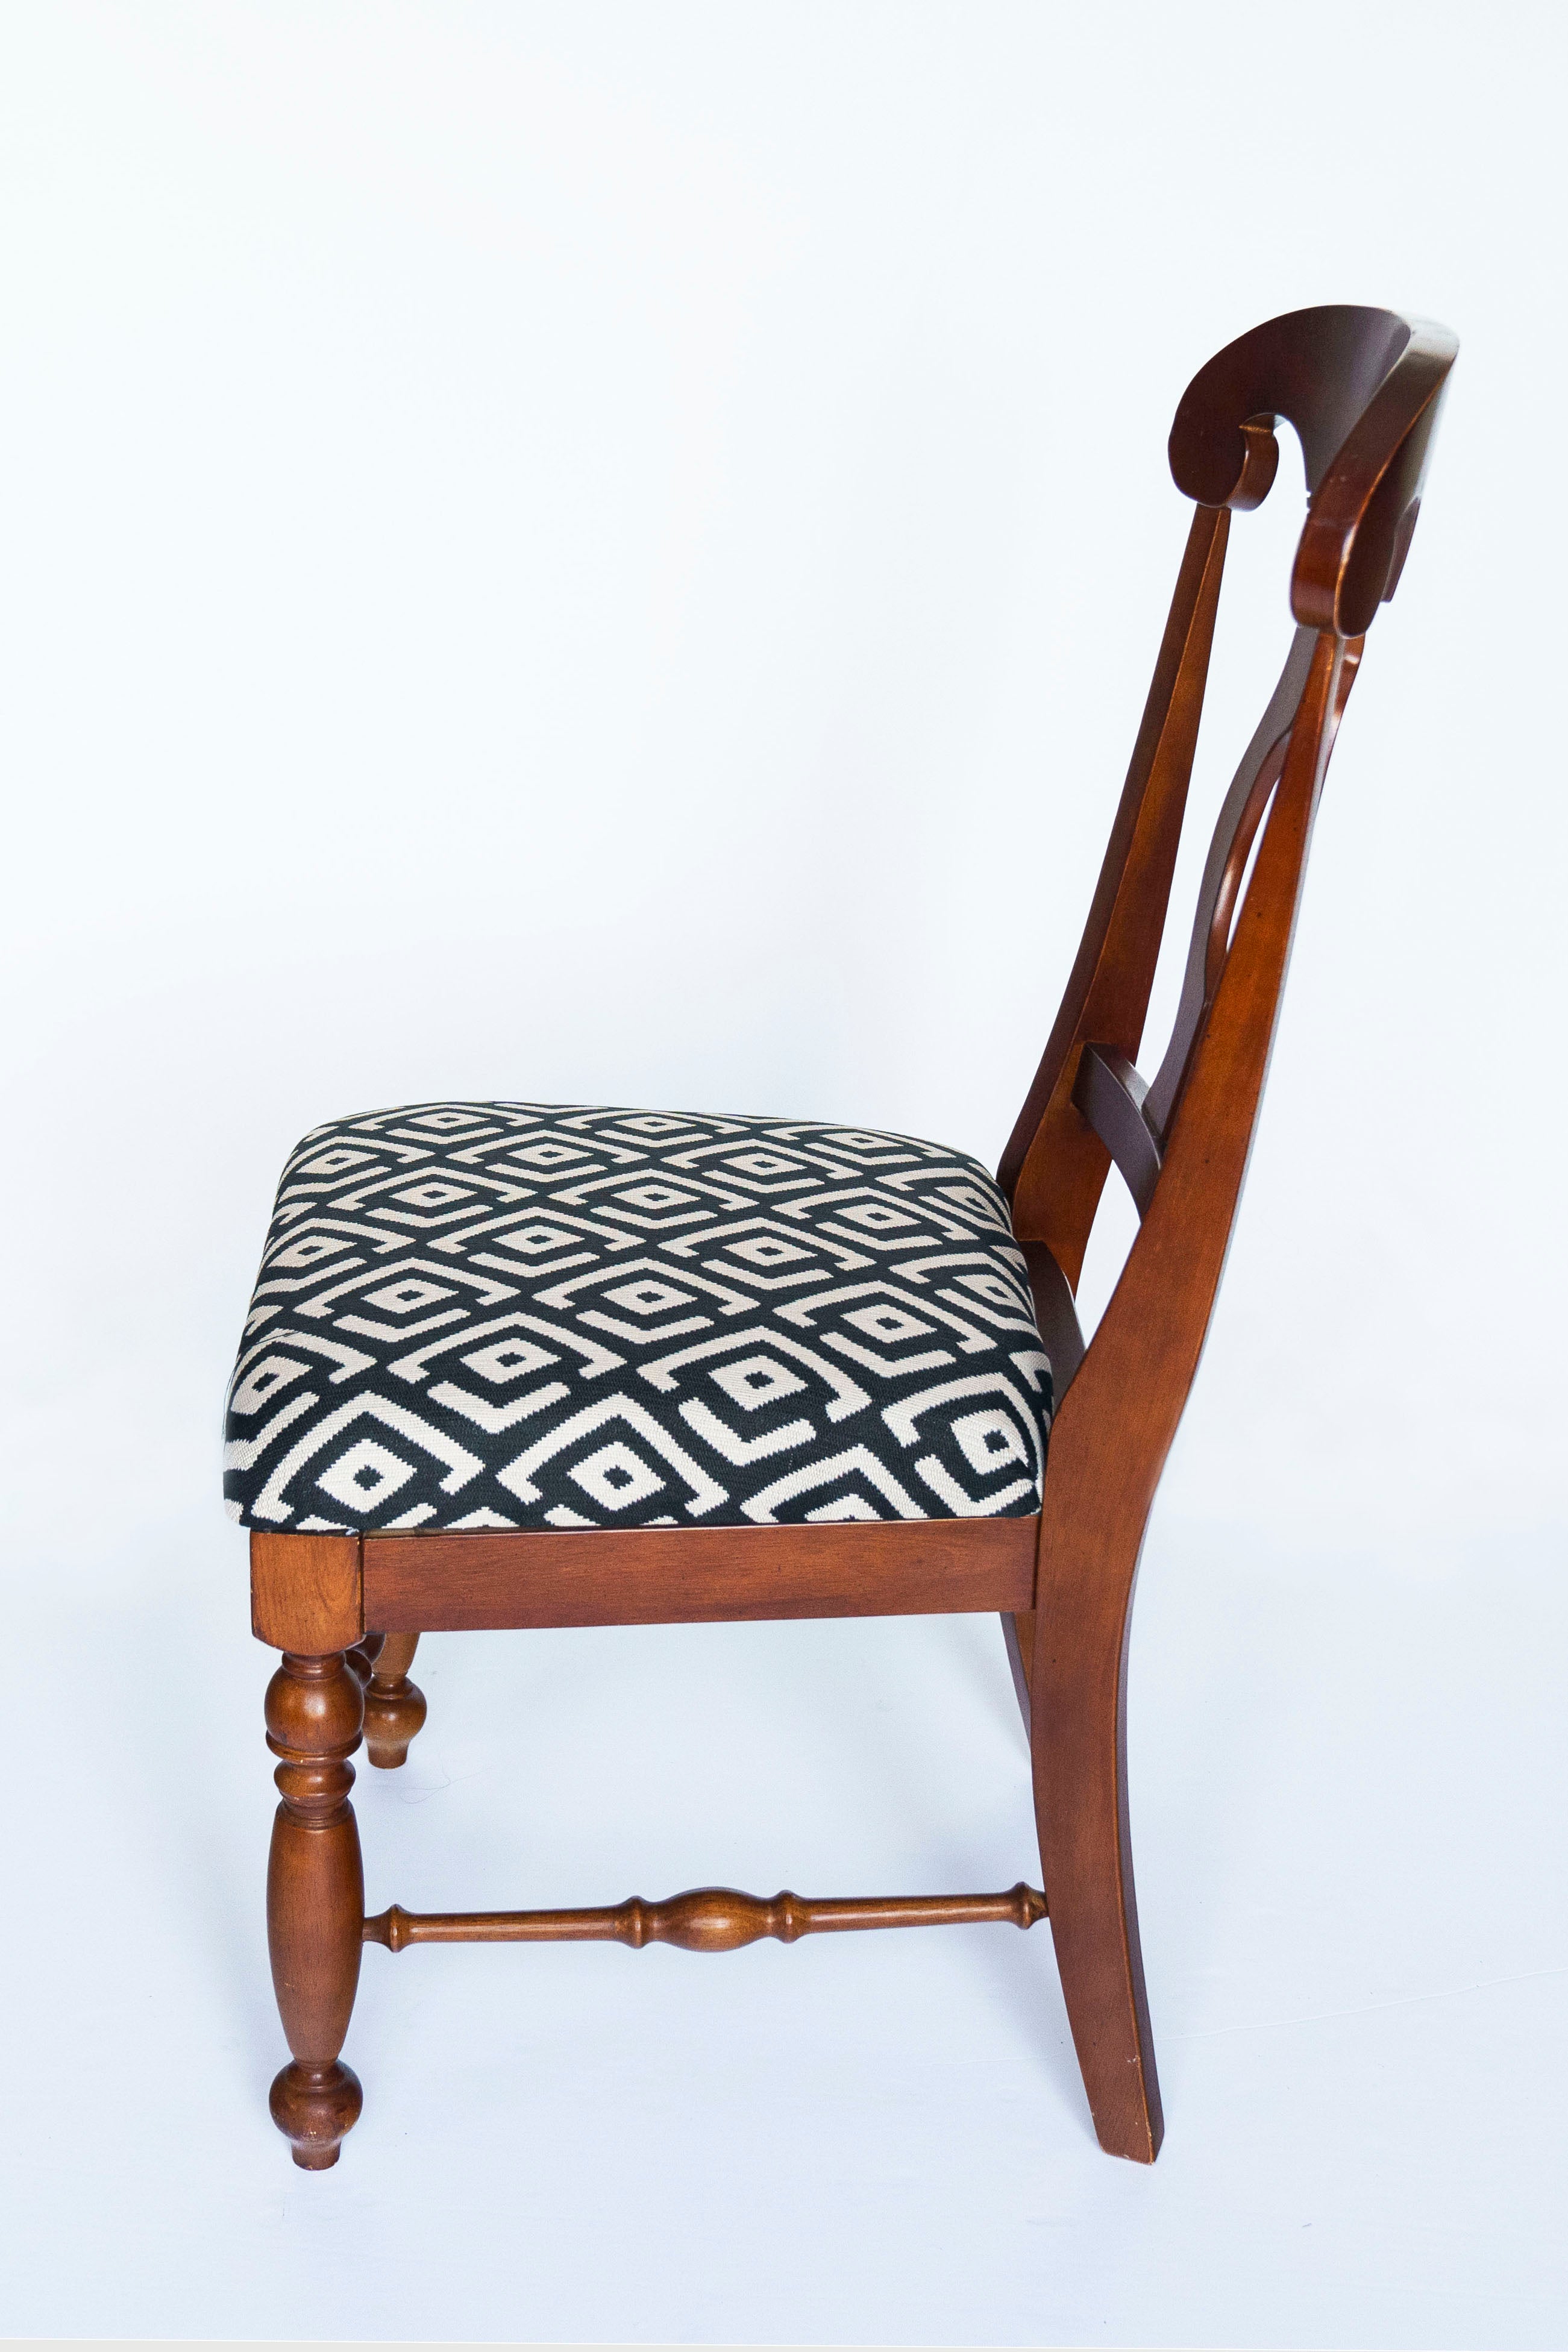 Two Traditional Side Chairs with Black and Beige Woven Fabric